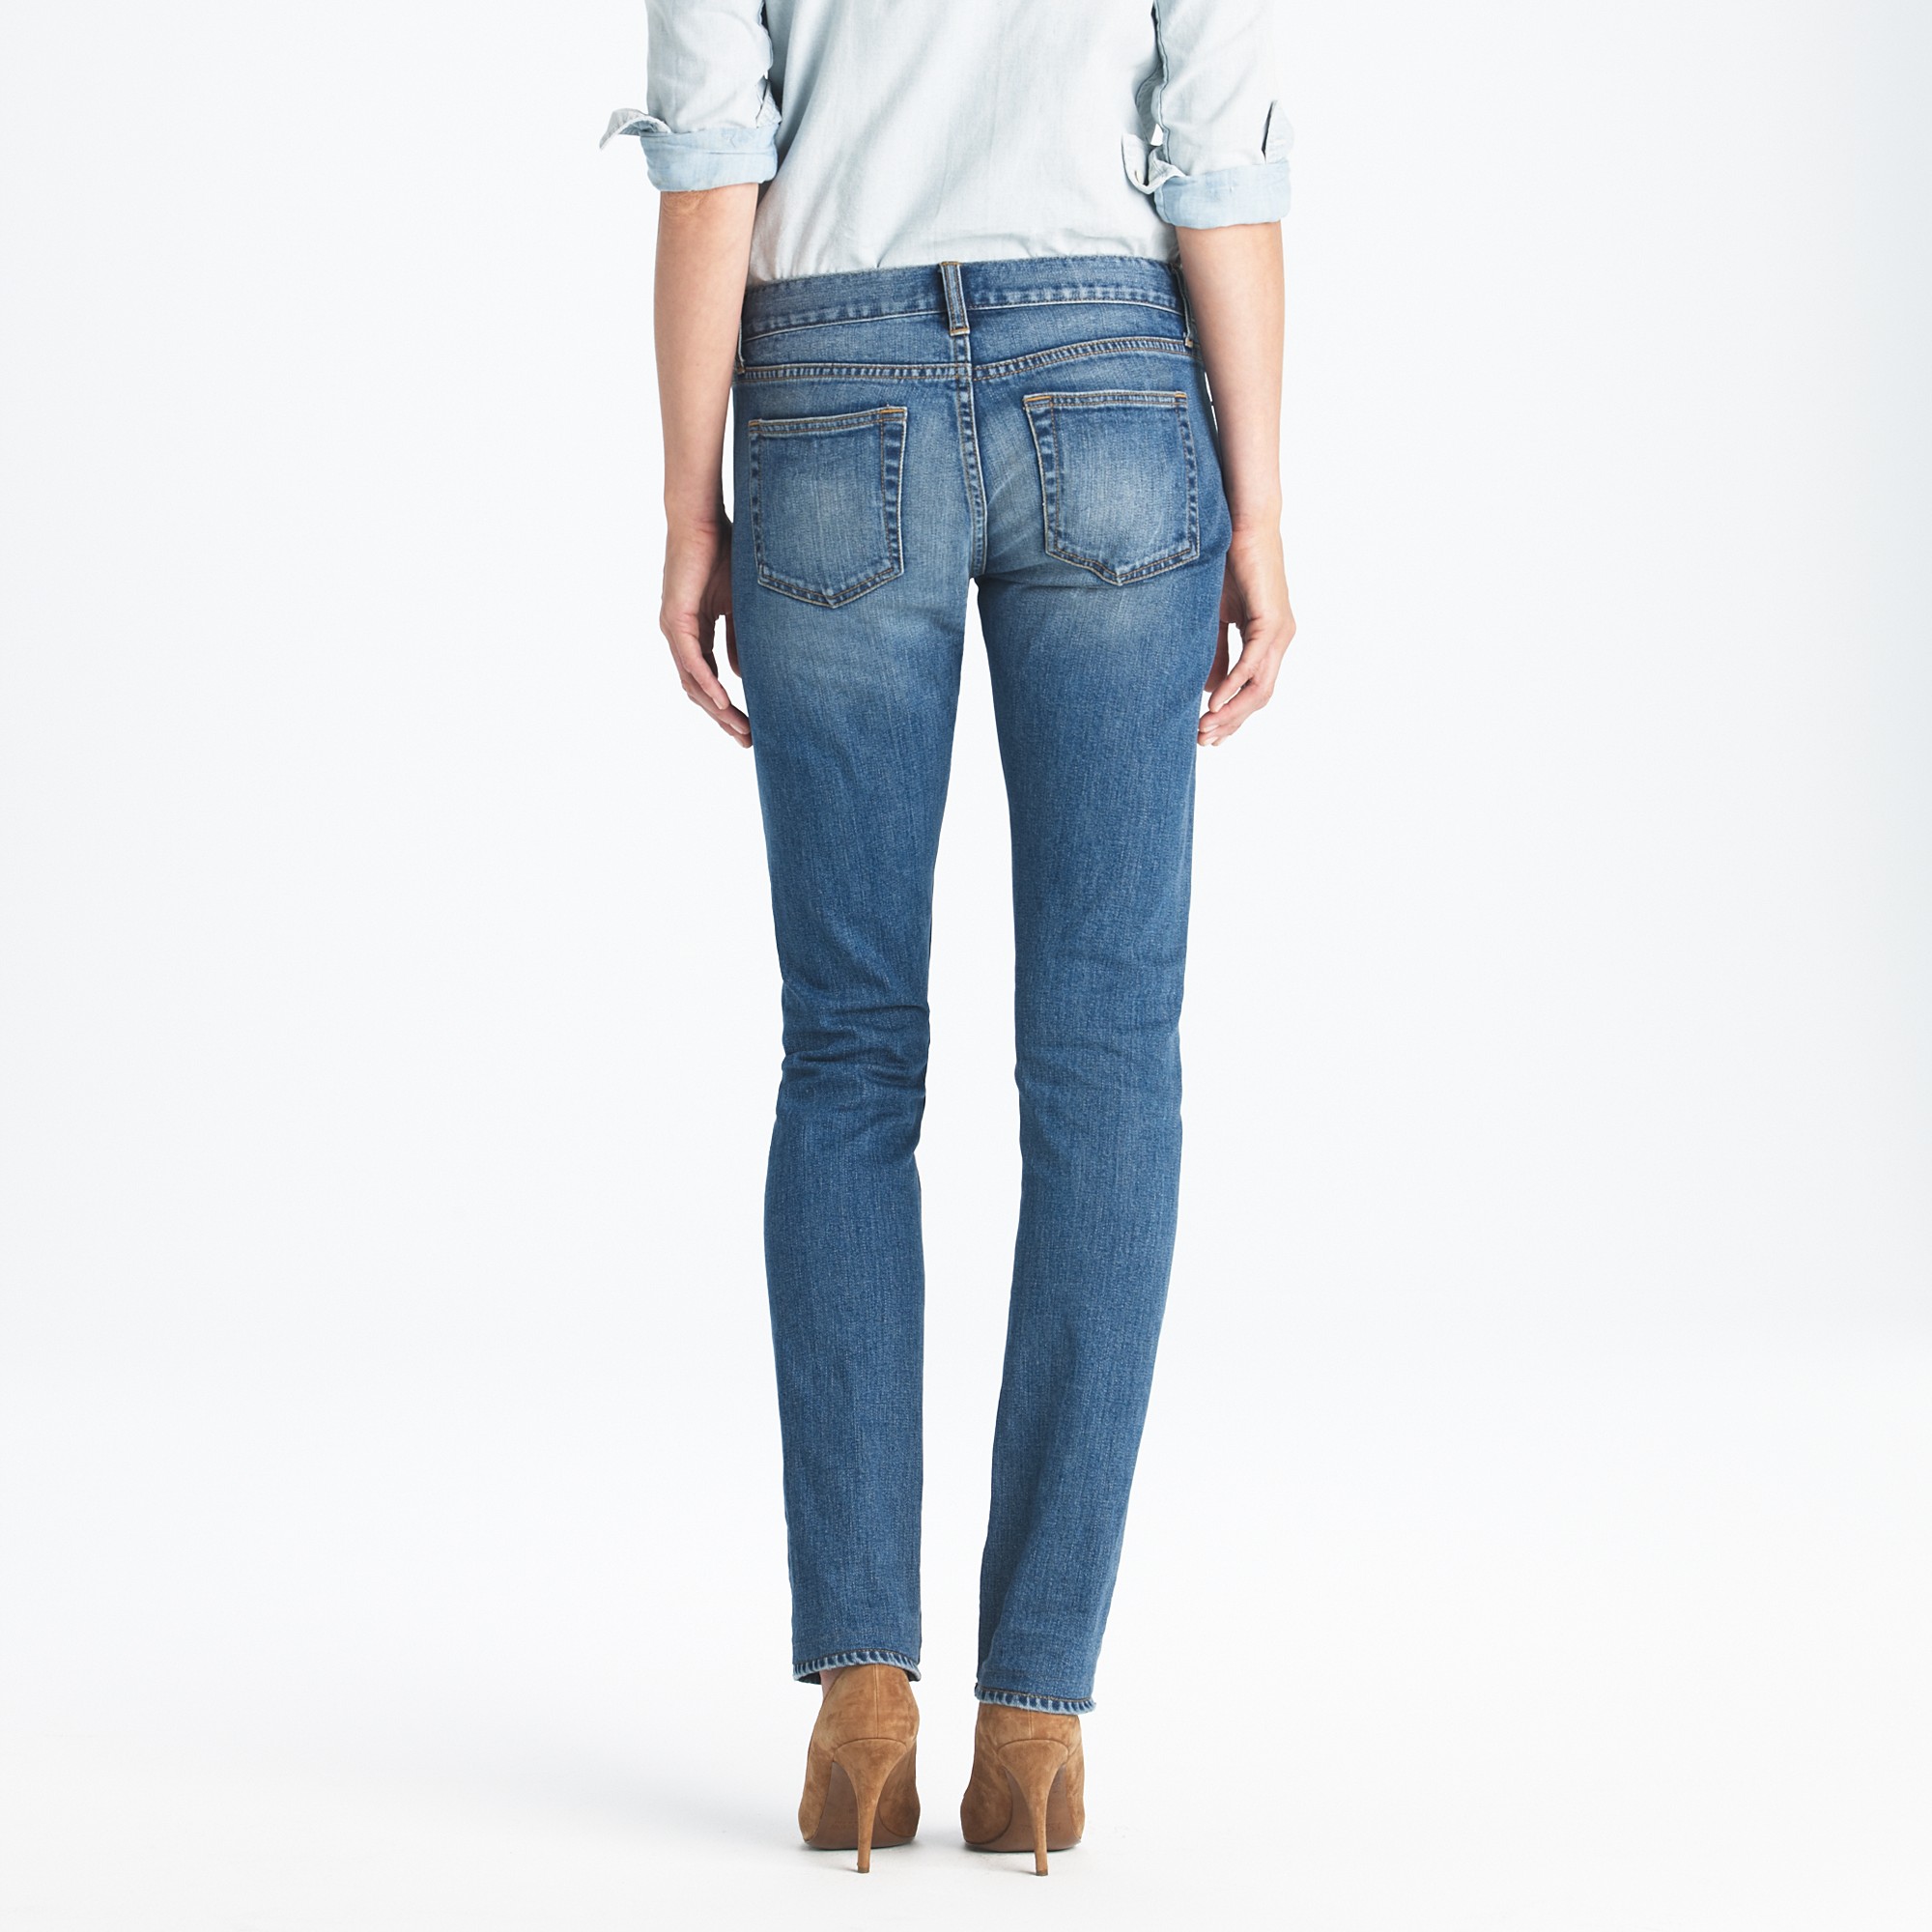 J.Crew Matchstick Jean in Selvedge in Blue - Lyst